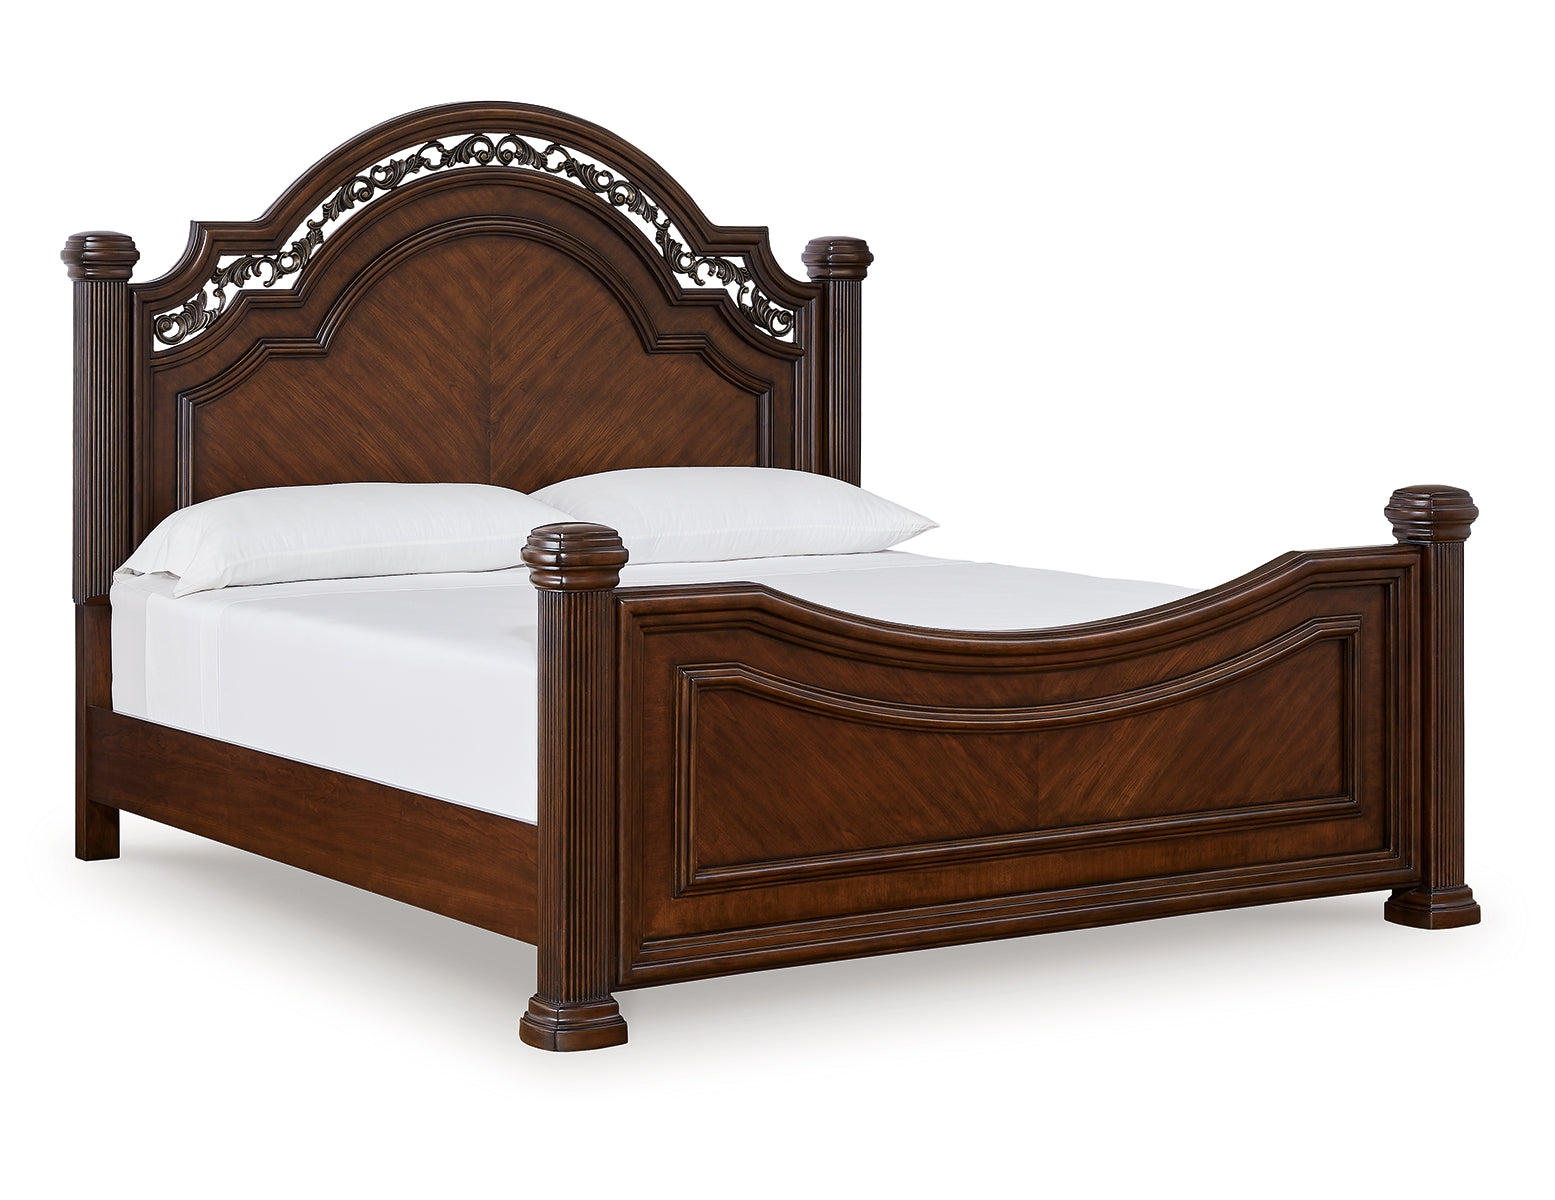 Lavinton King Poster Bed with Dresser